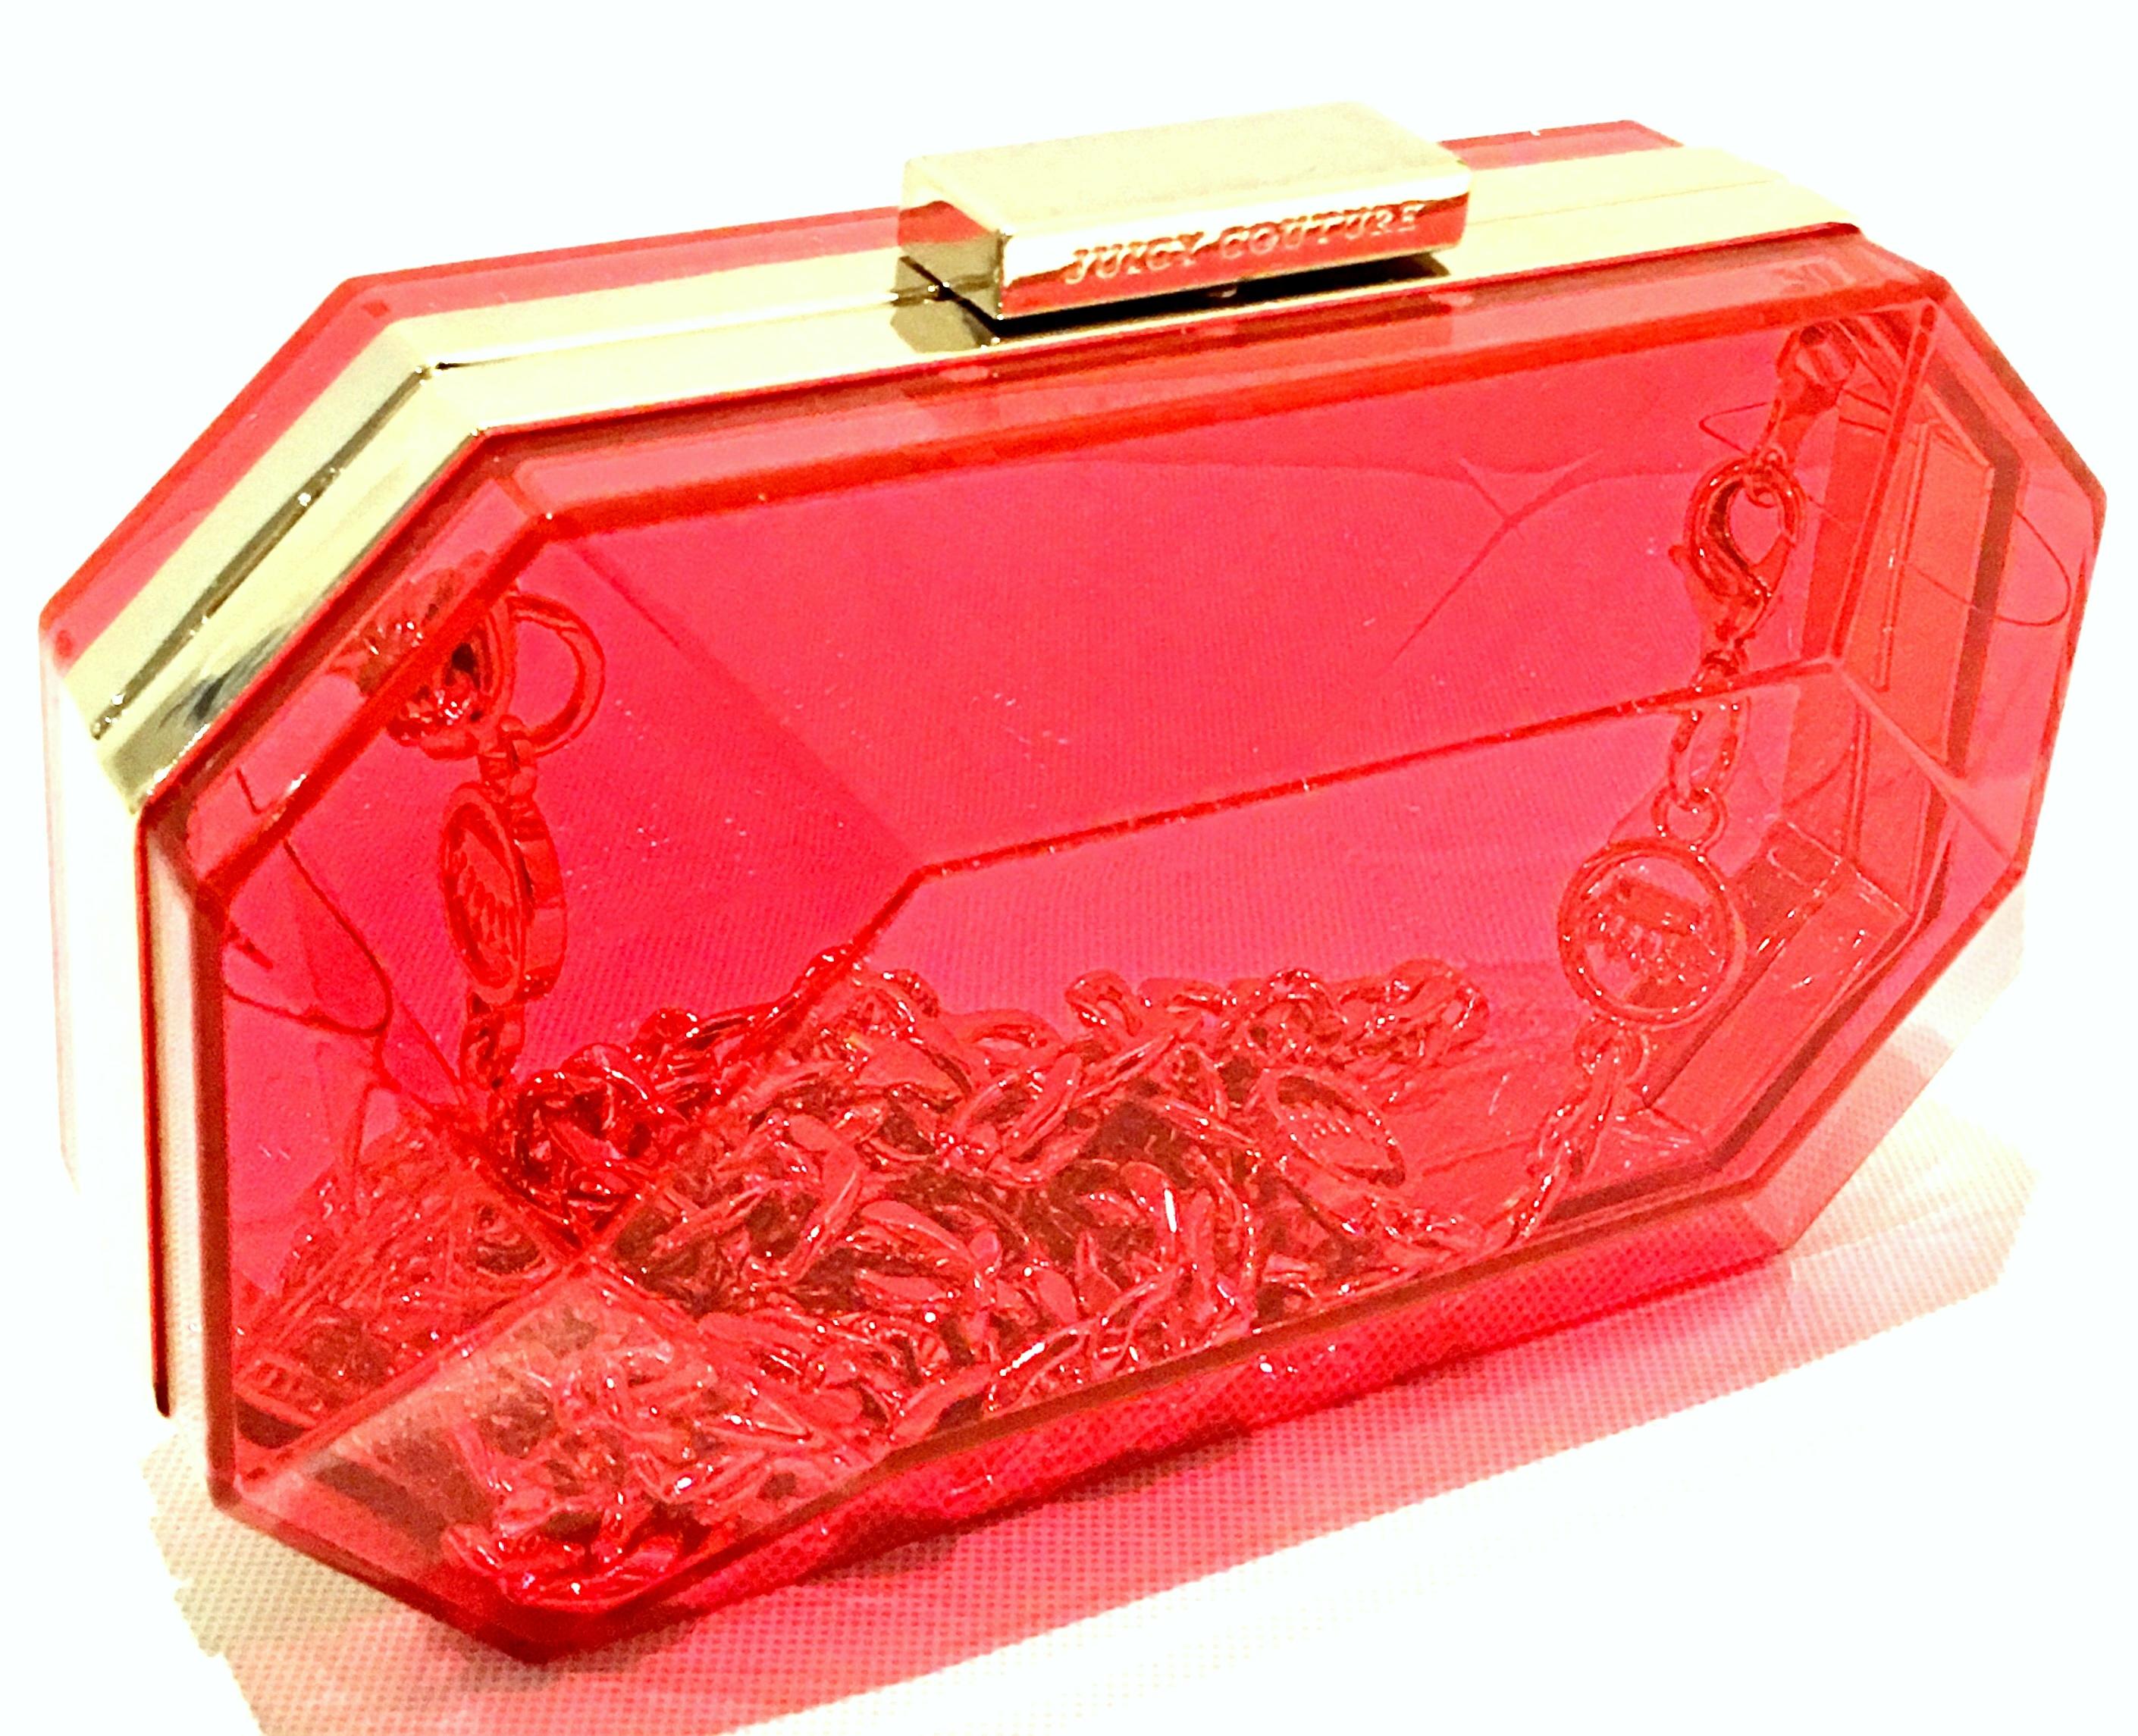 21st Century New Lucite & Gold Minaudiere Clutch Or Shoulder Bag By, Juicy Couture. Features a fuchsia to orange color with cut and faceted jewel shape. Gold bar snap closure with engraved Juicy Couture logo/font. Includes a 34